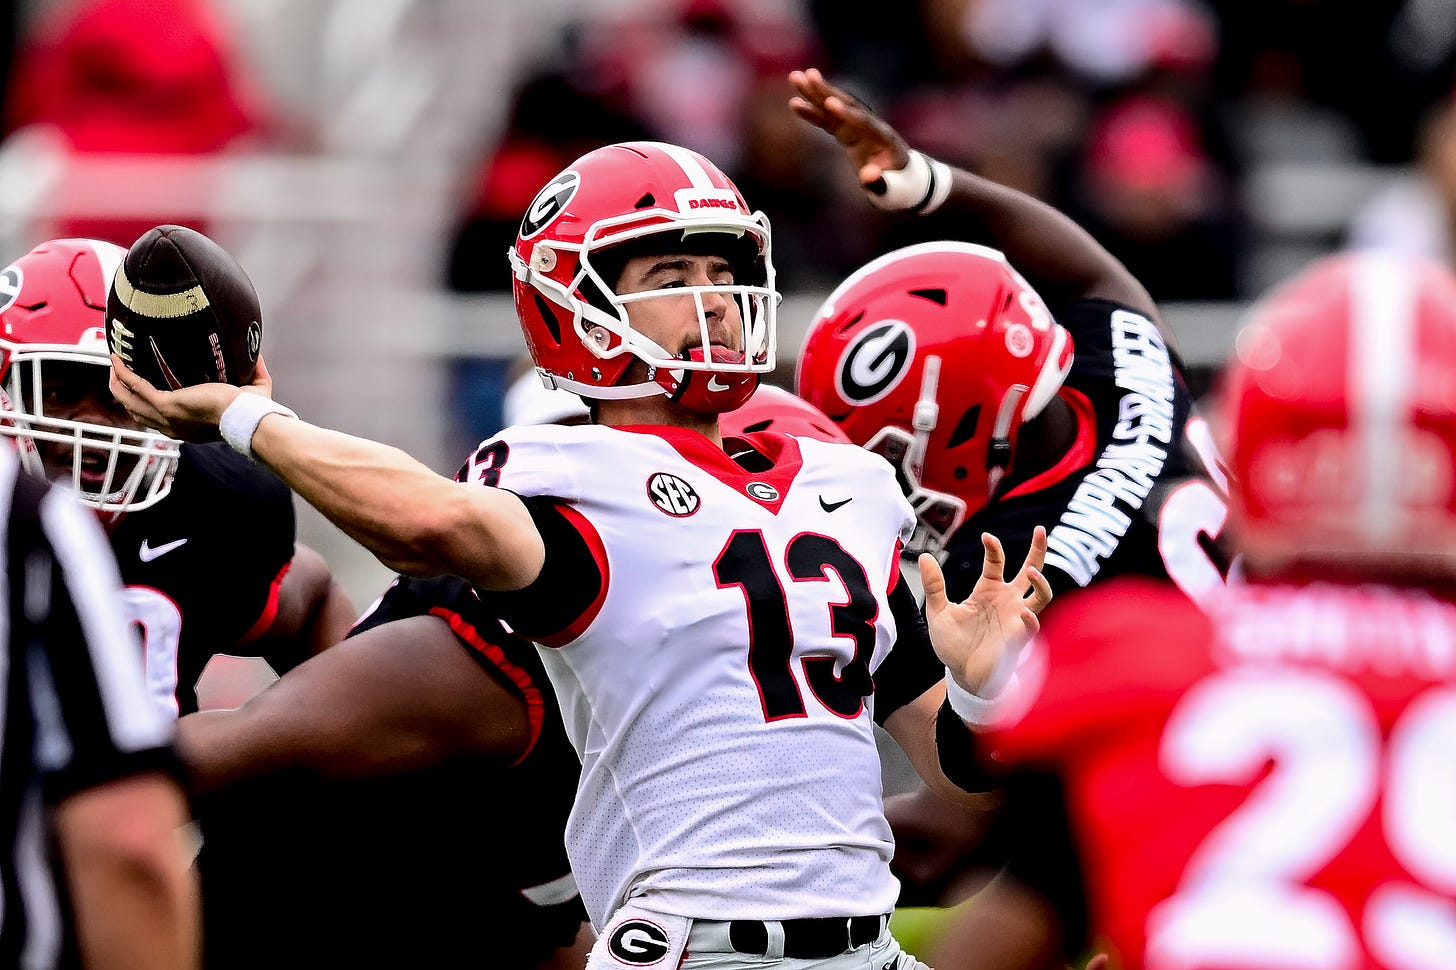 Georgia quarterback Stetson Bennett (13) during the G-Day scrimmage on Dooley Field at Sanford Stadium in Athens, Ga., on Saturday, April 16, 2022. (Photo by Rob Davis)